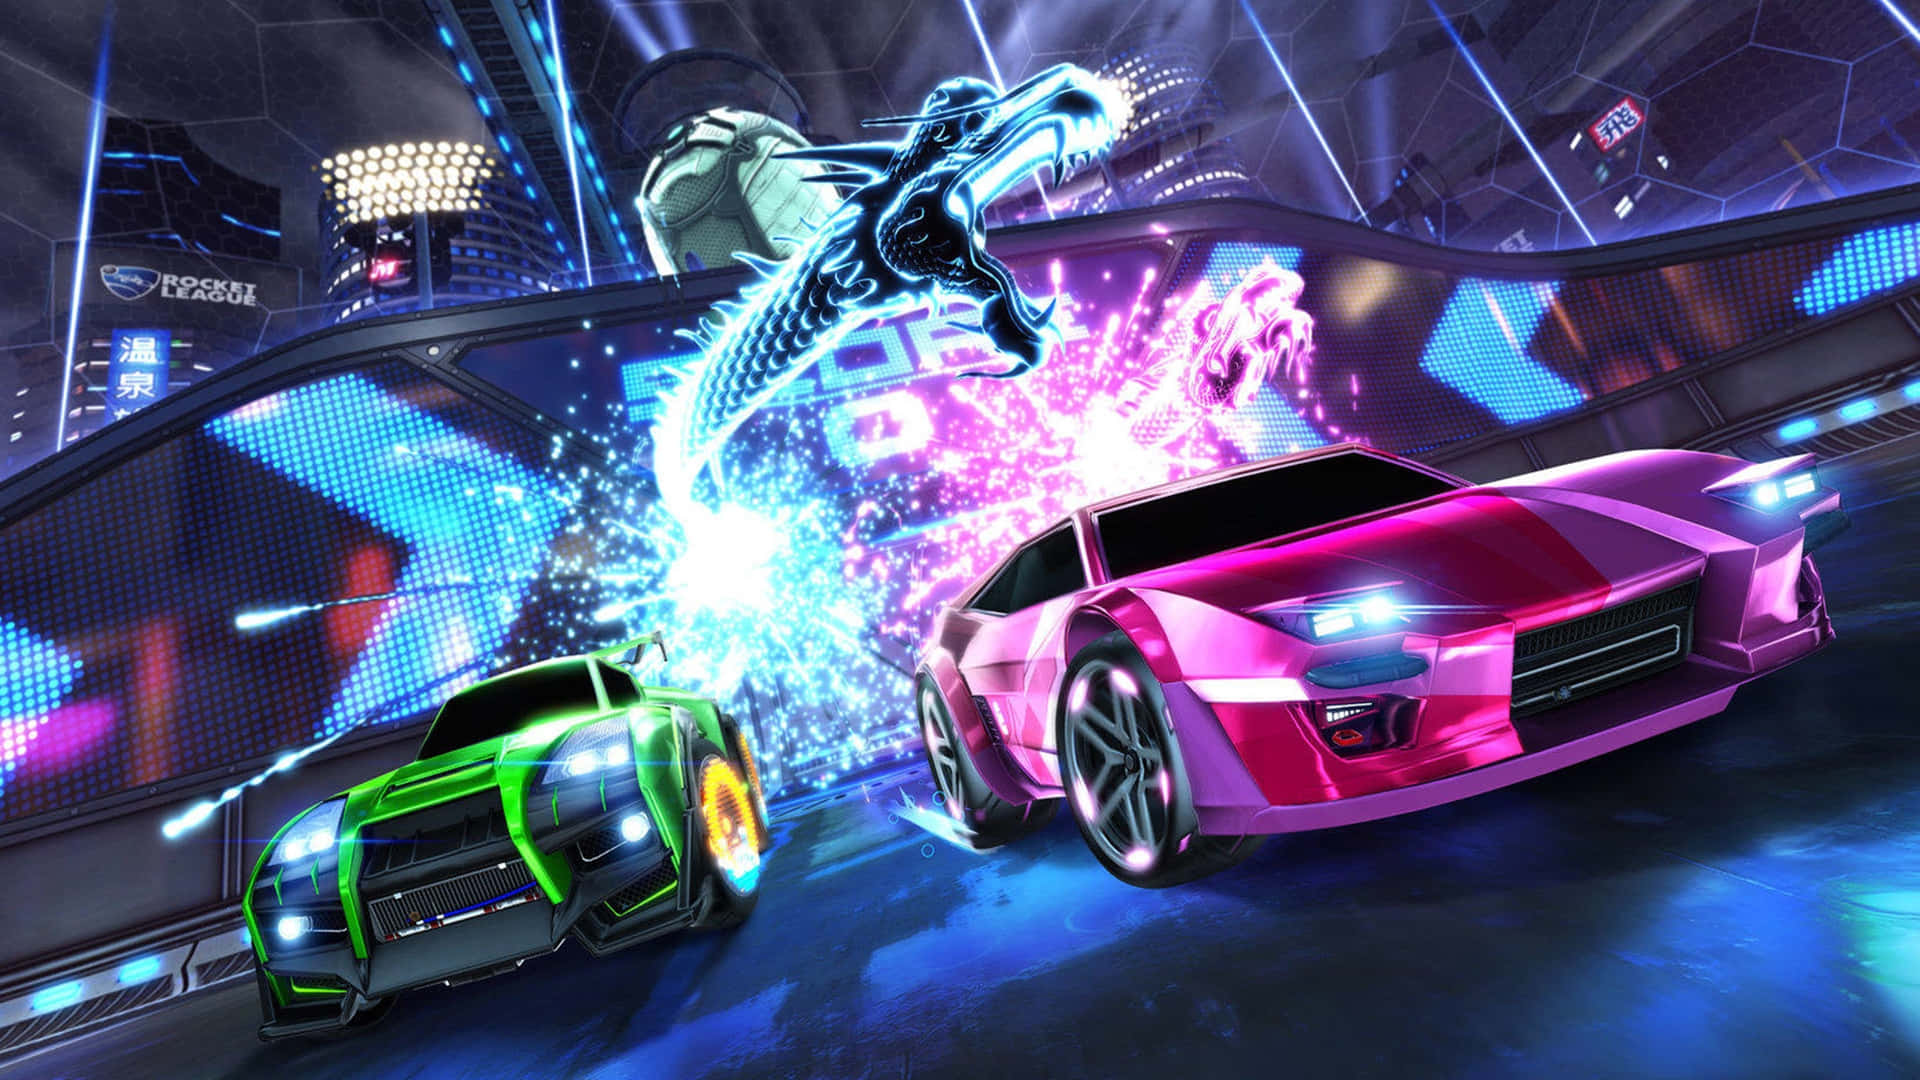 Experience the thrill of Rocket League in 1080p high definition